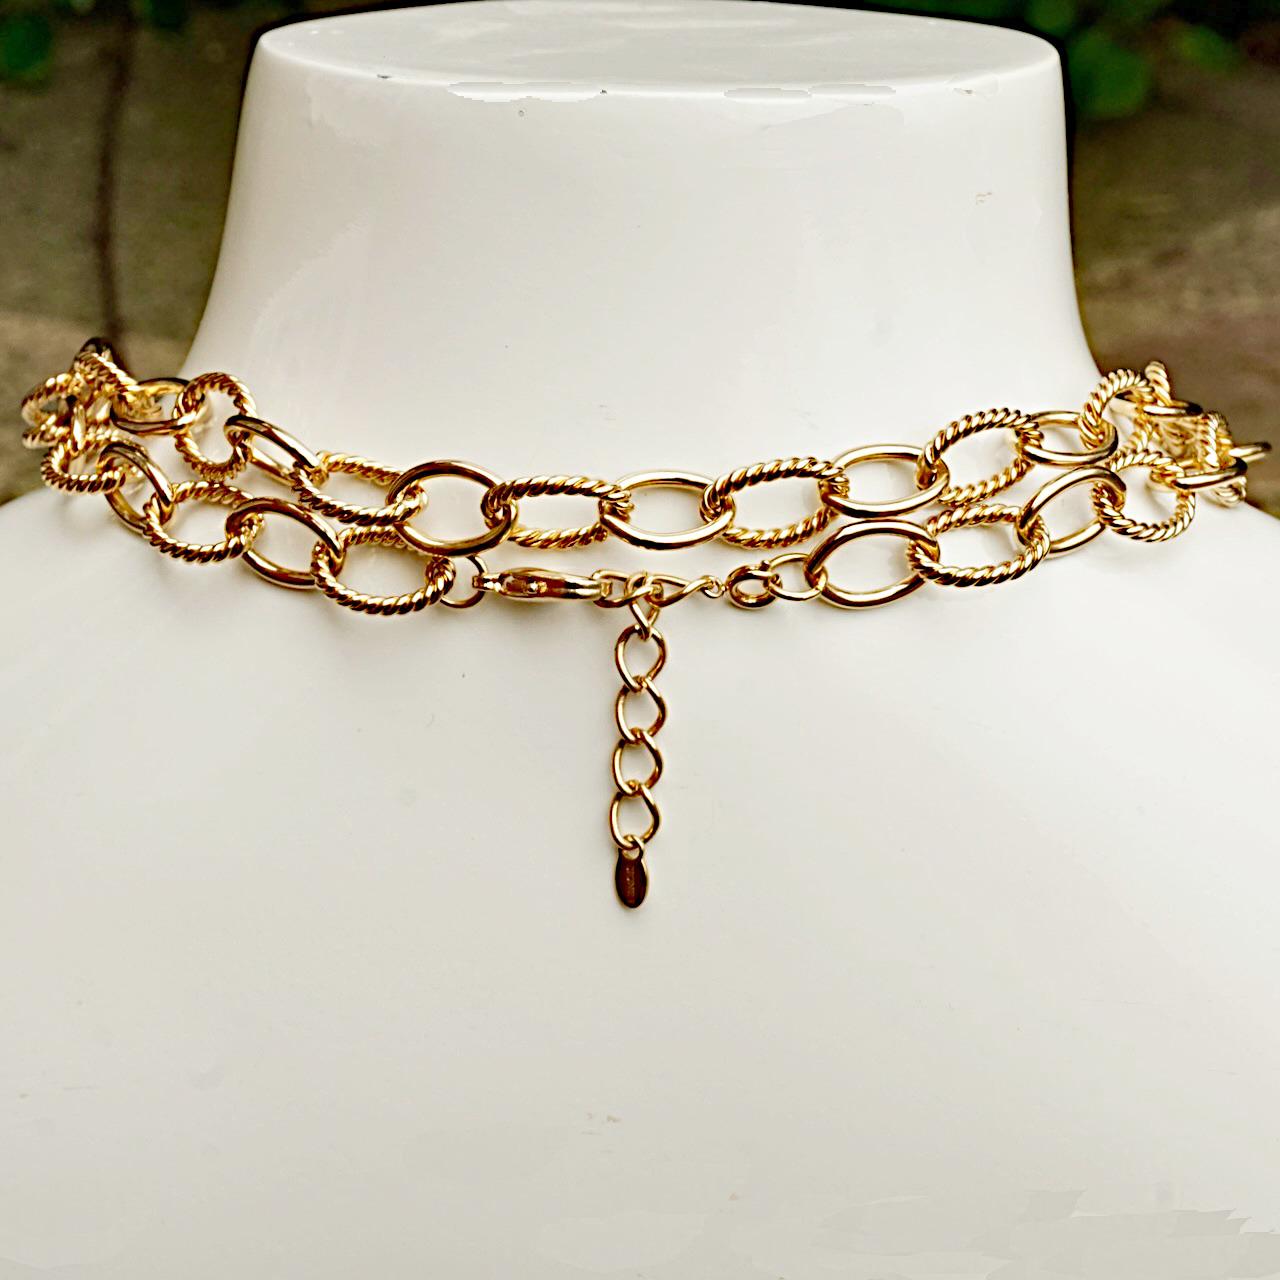 Monet Gold Plated Oval Link Chain Necklace circa 1980s  1